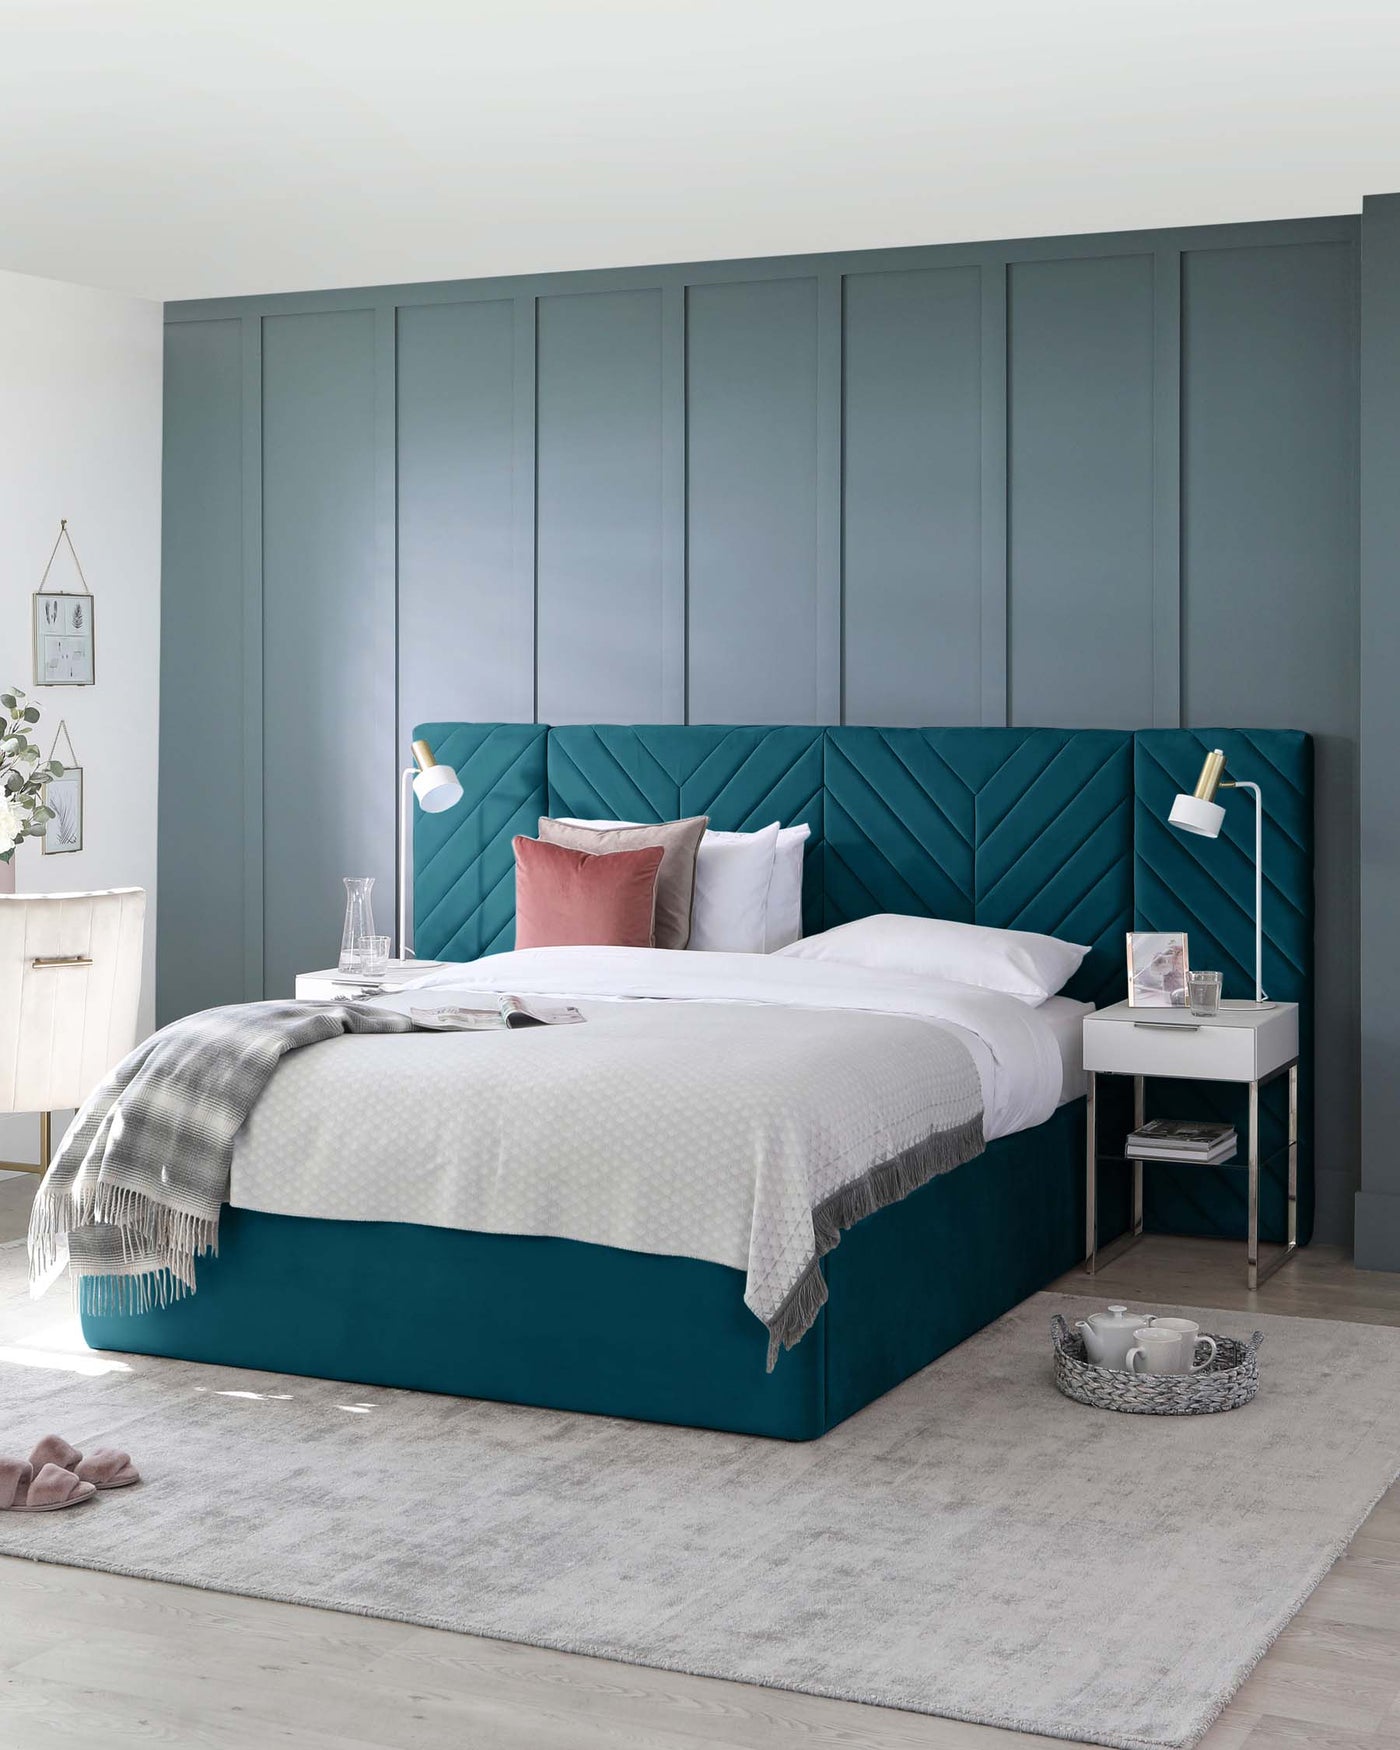 Elegant bedroom furniture featuring a large, teal, upholstered platform bed with a chevron-patterned headboard and a small, white nightstand with an open shelf and a drawer. A soft grey area rug under the bed adds to the sophisticated ambiance.